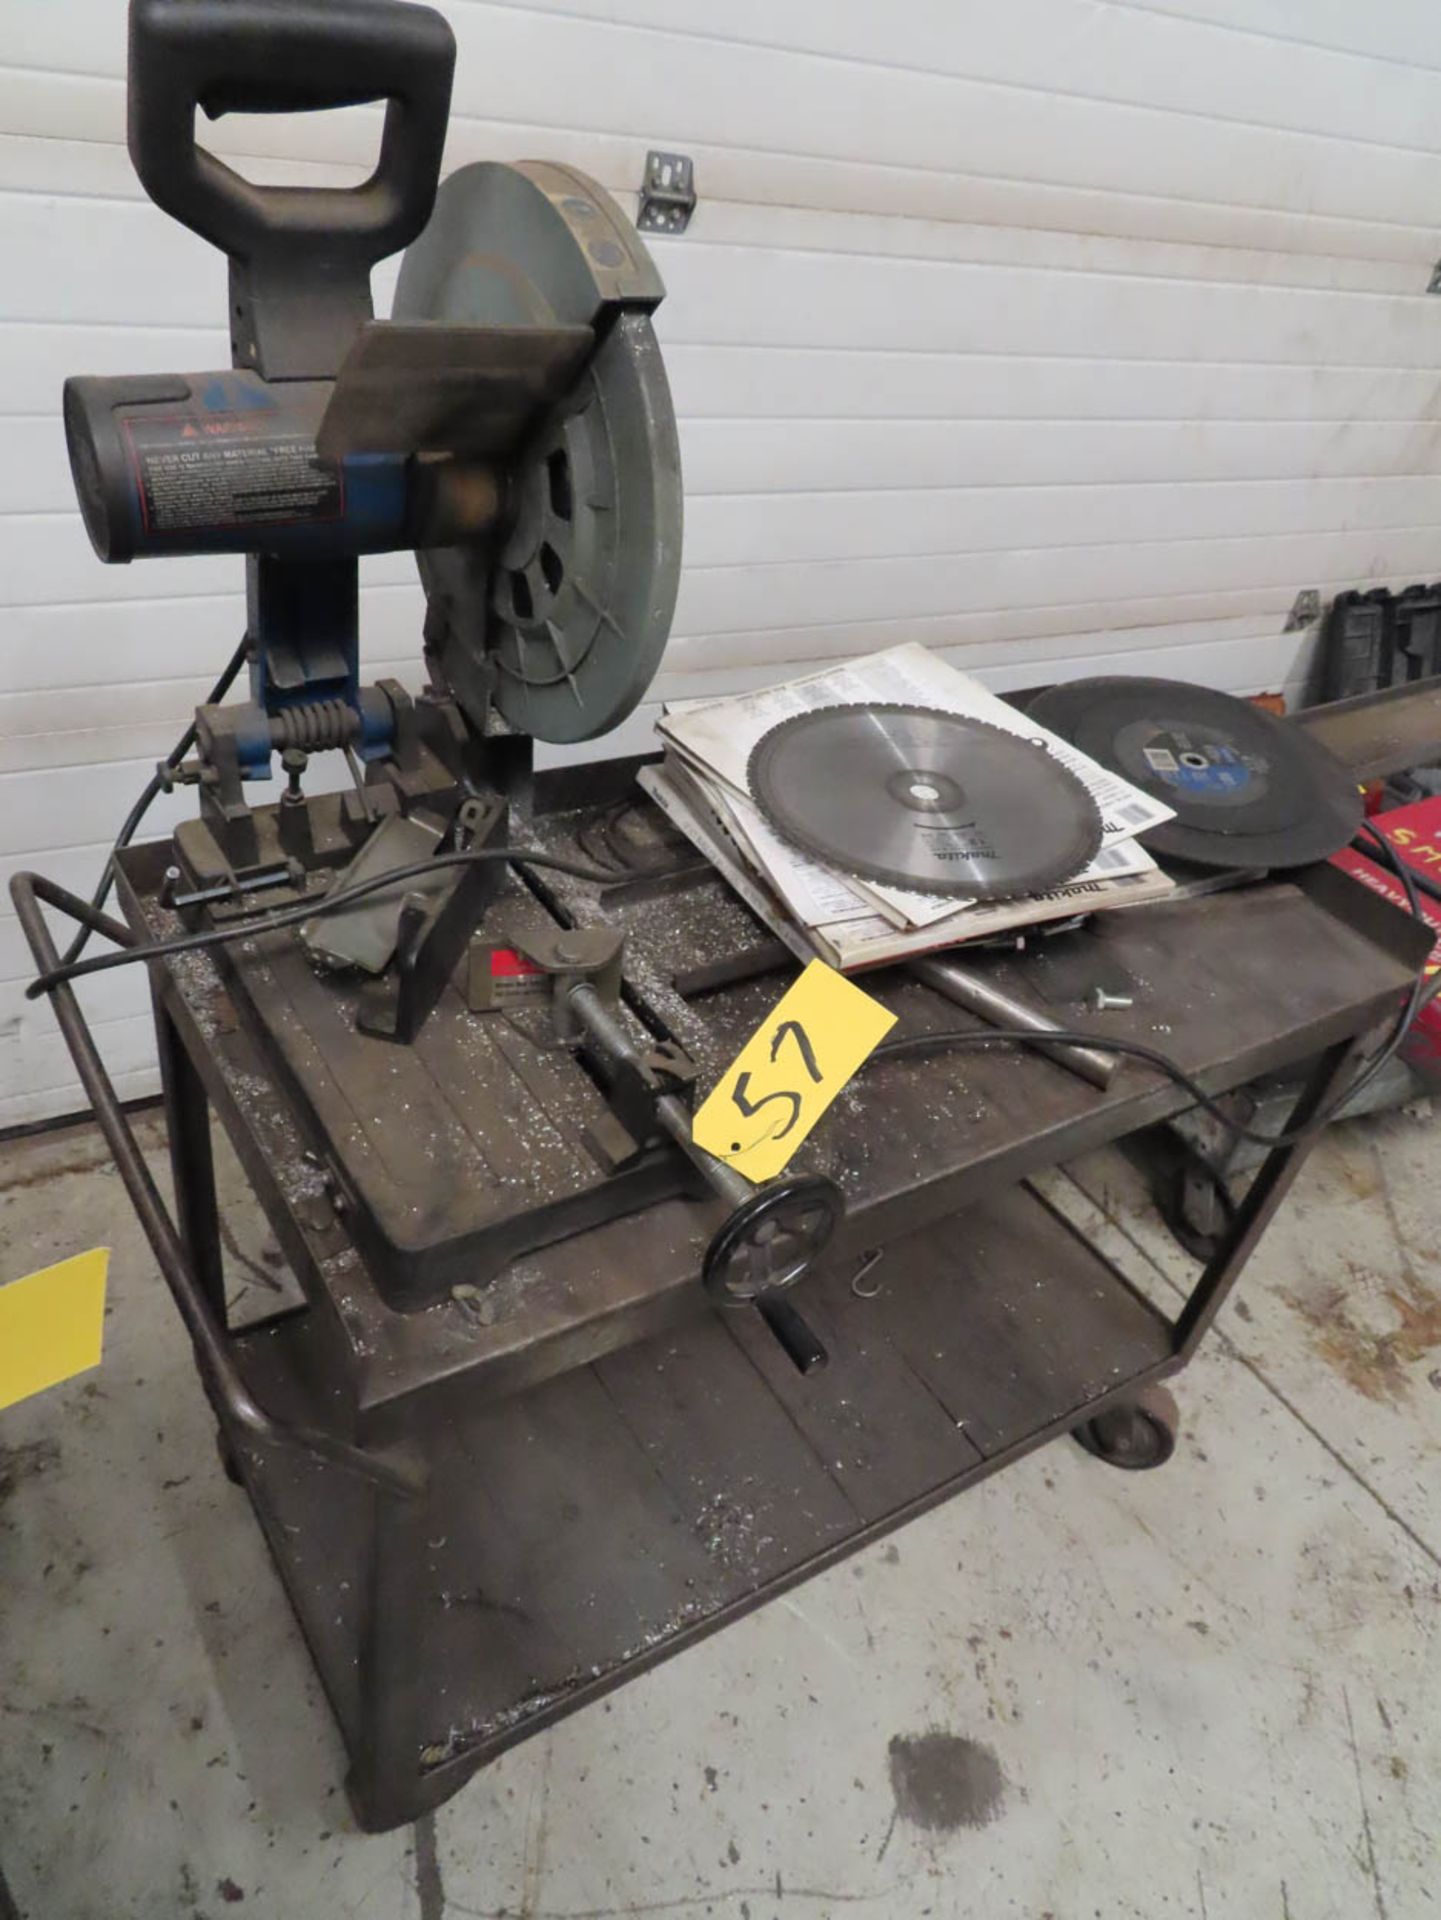 Steel Max 14" Metal Cutting Saw With Blades & Cart